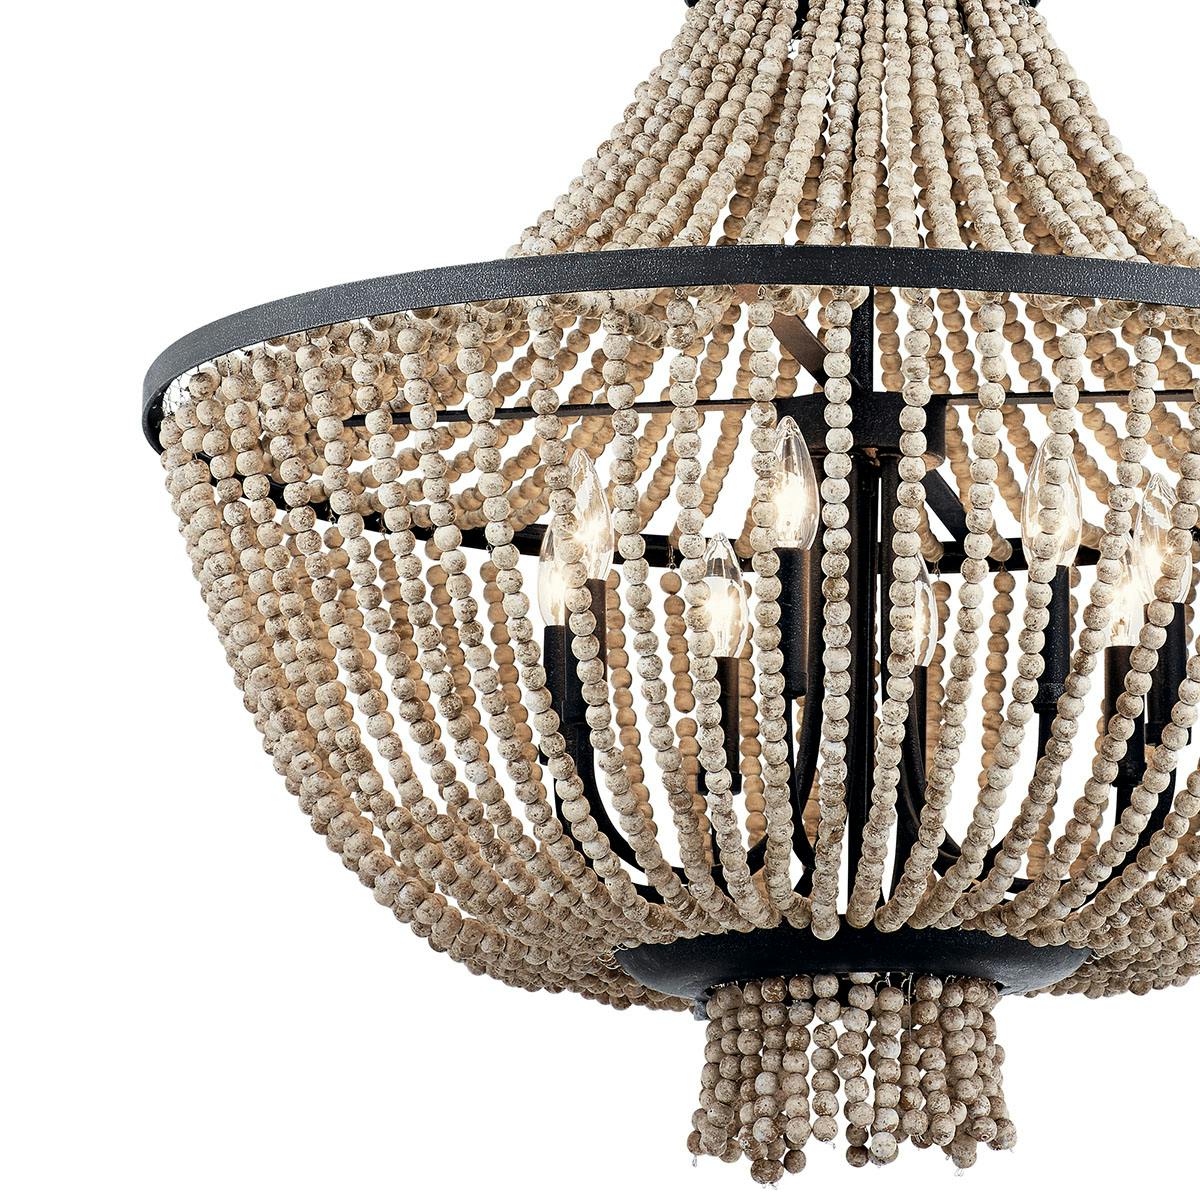 Close up view of the Brisbane 31.75" Chandelier Black on a white background